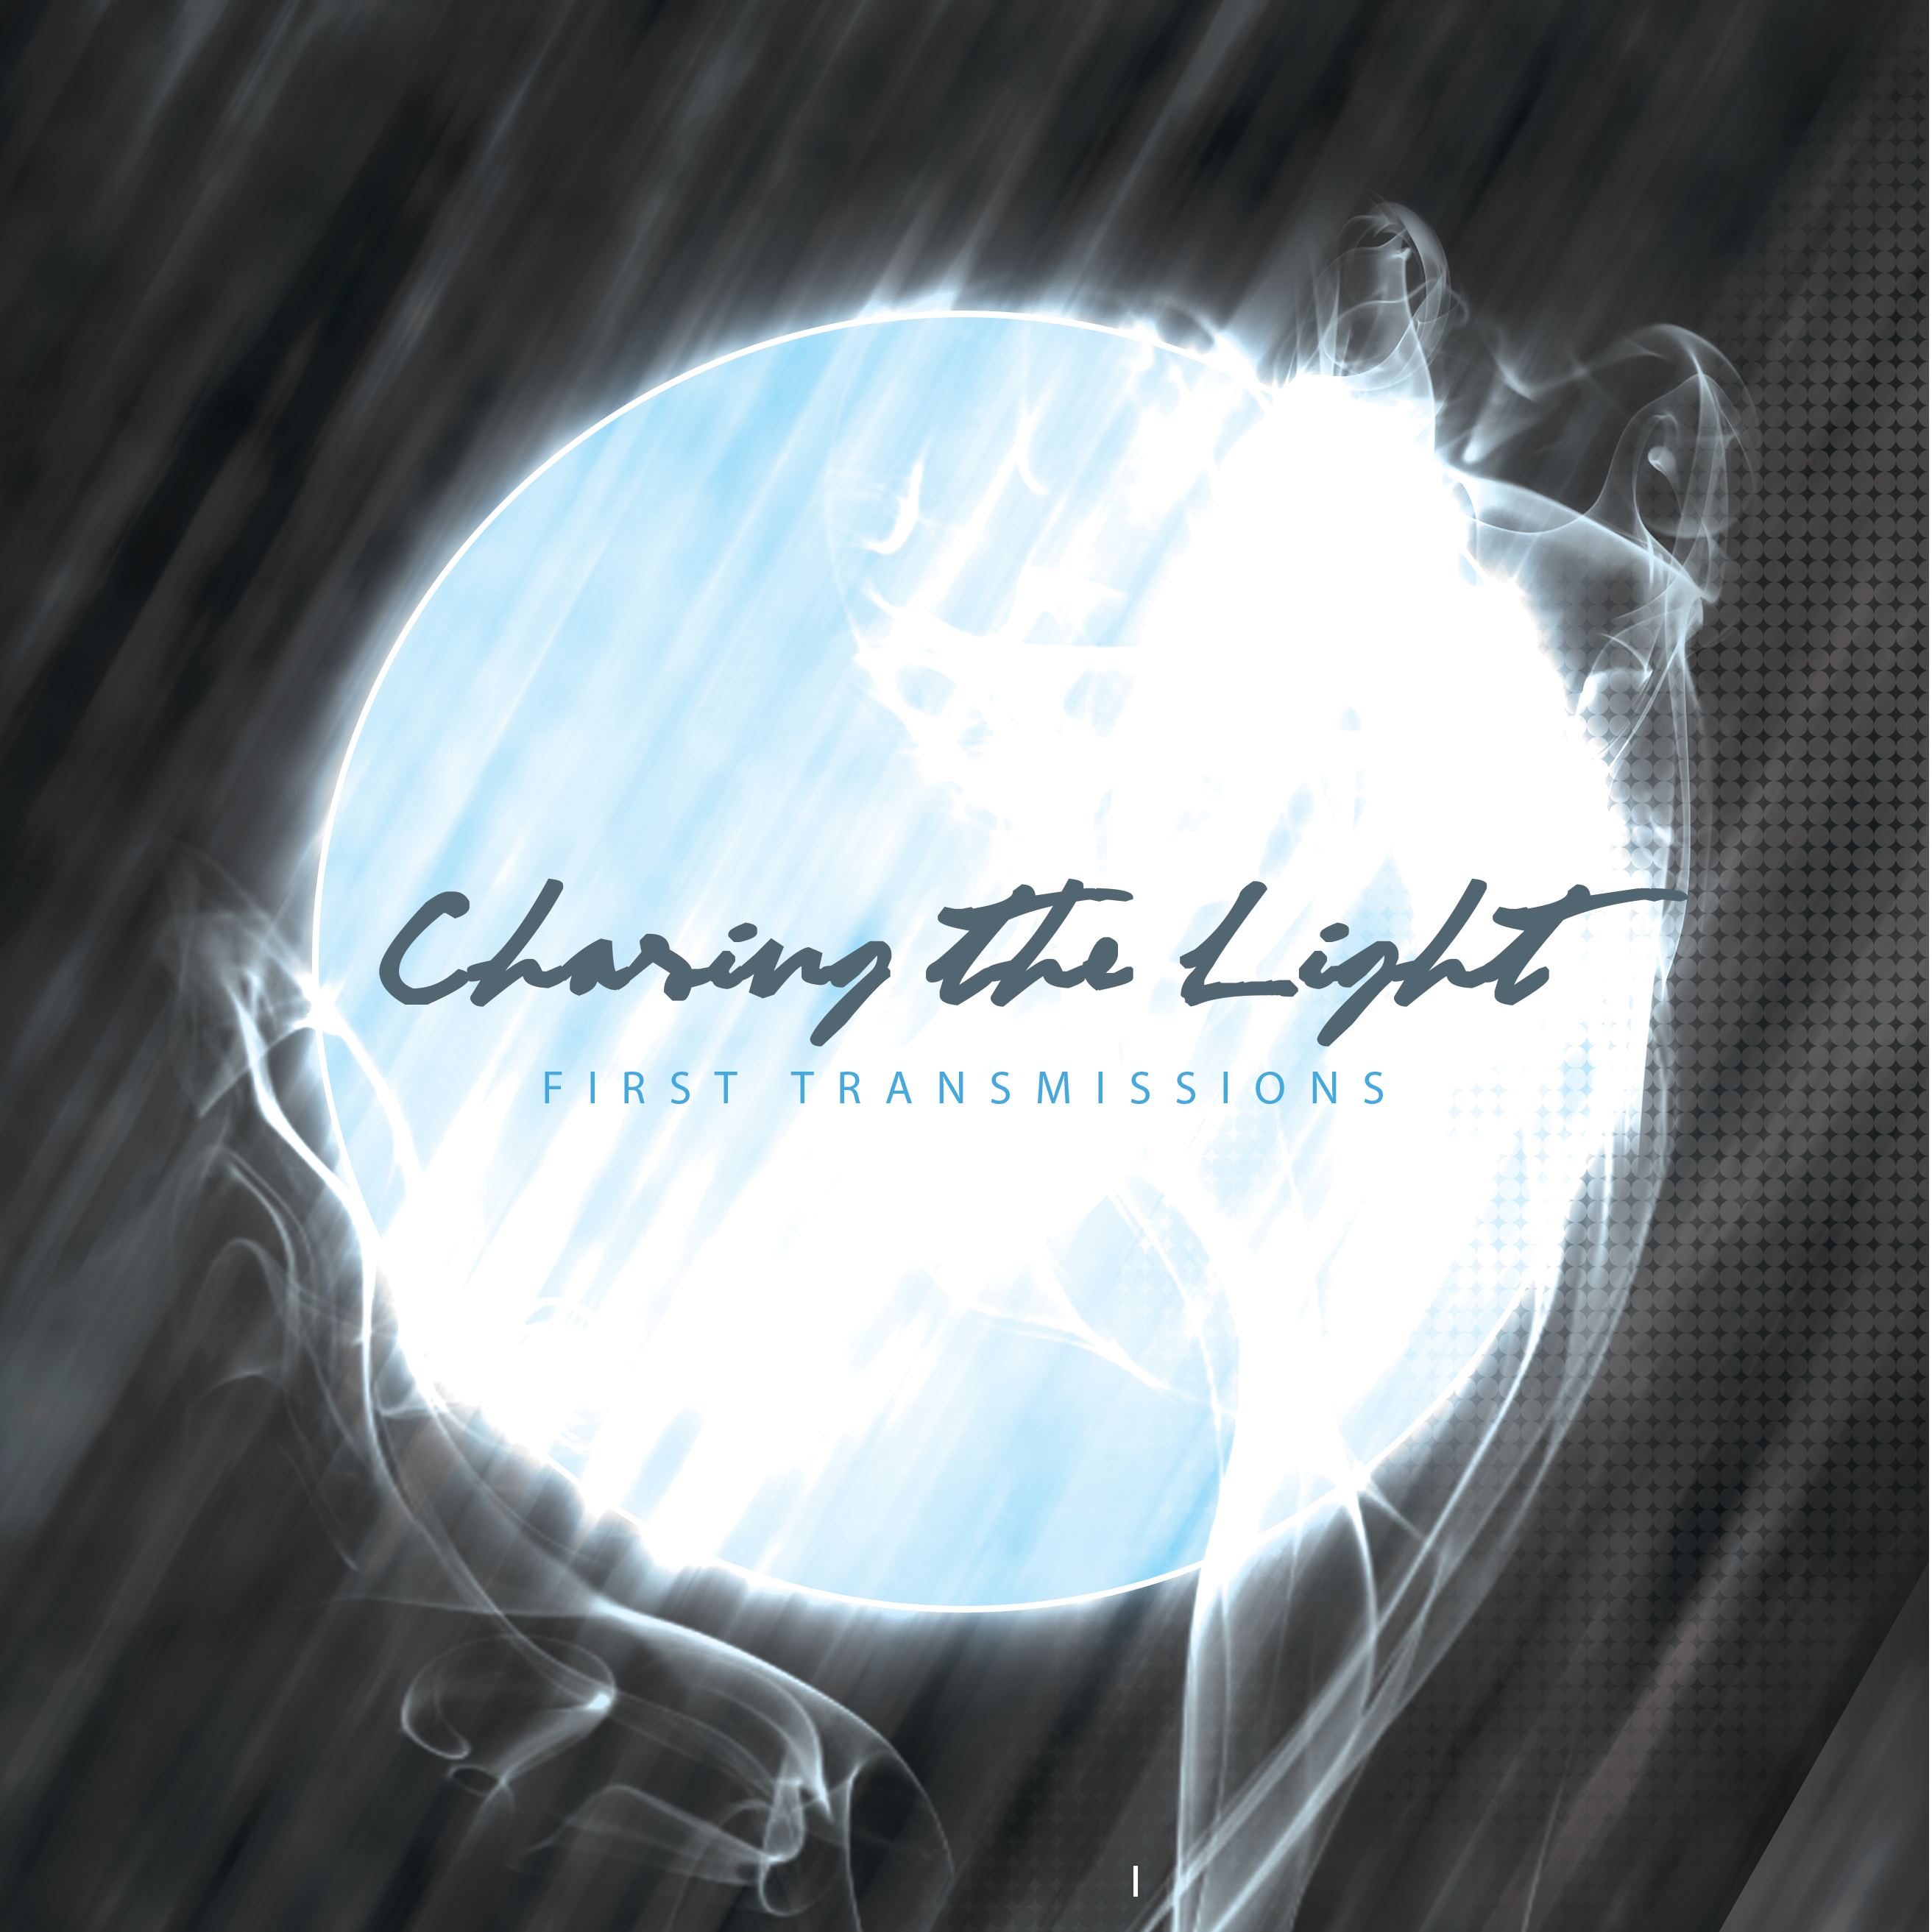 Funky Jesus Music Podcast Starring Chasing The Light